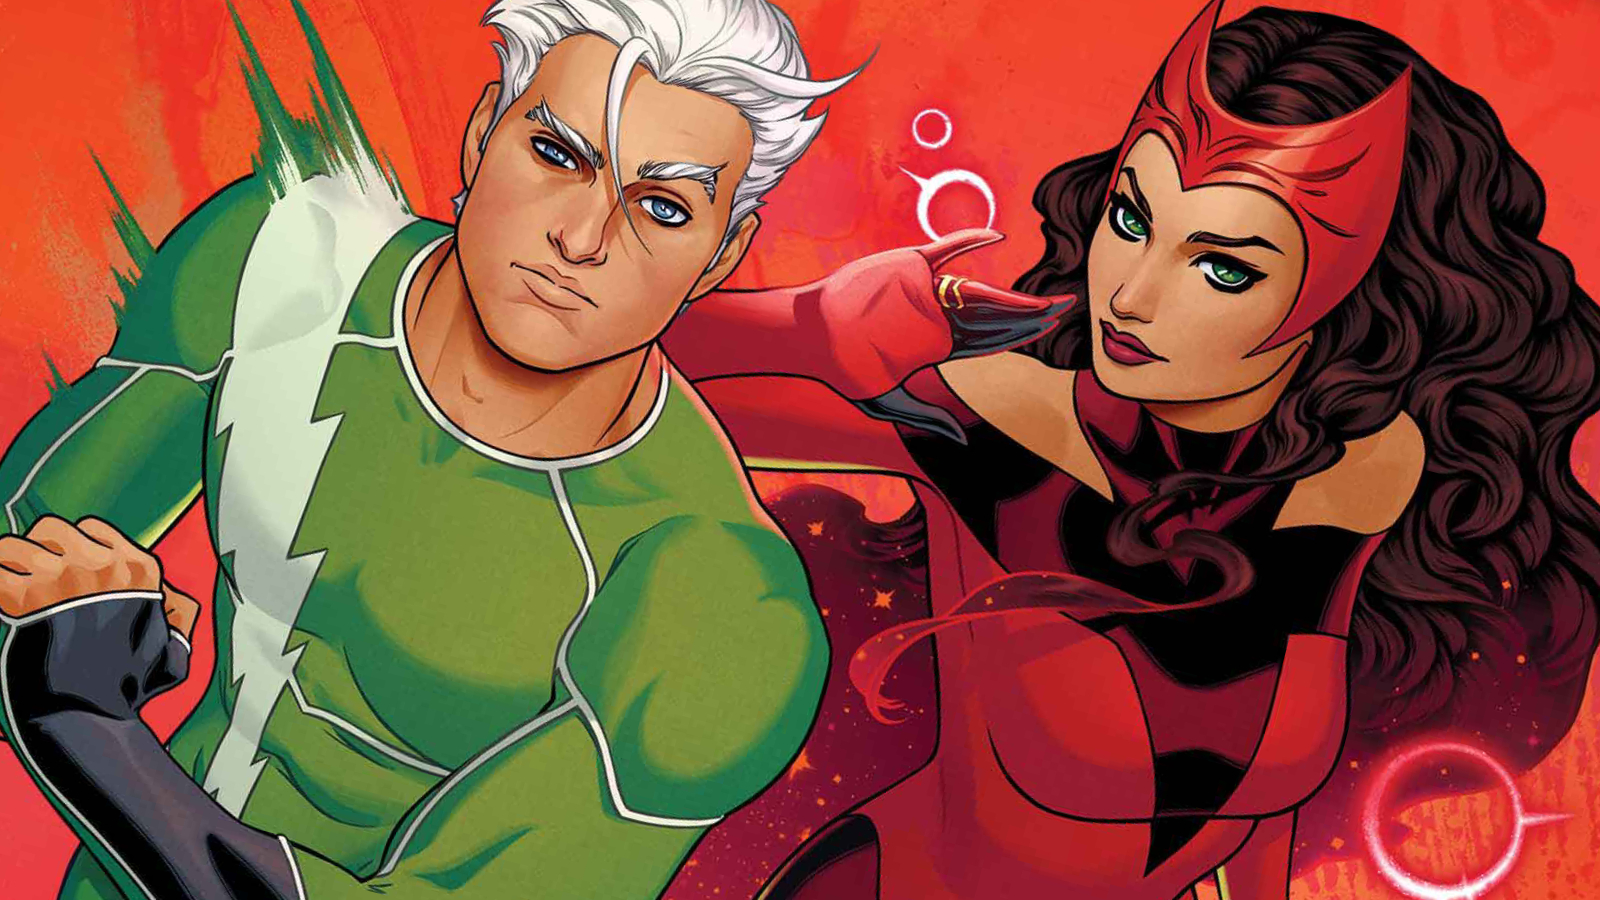 Scarlet Witch and Quicksilver  Marvel superheroes, Scarlet witch